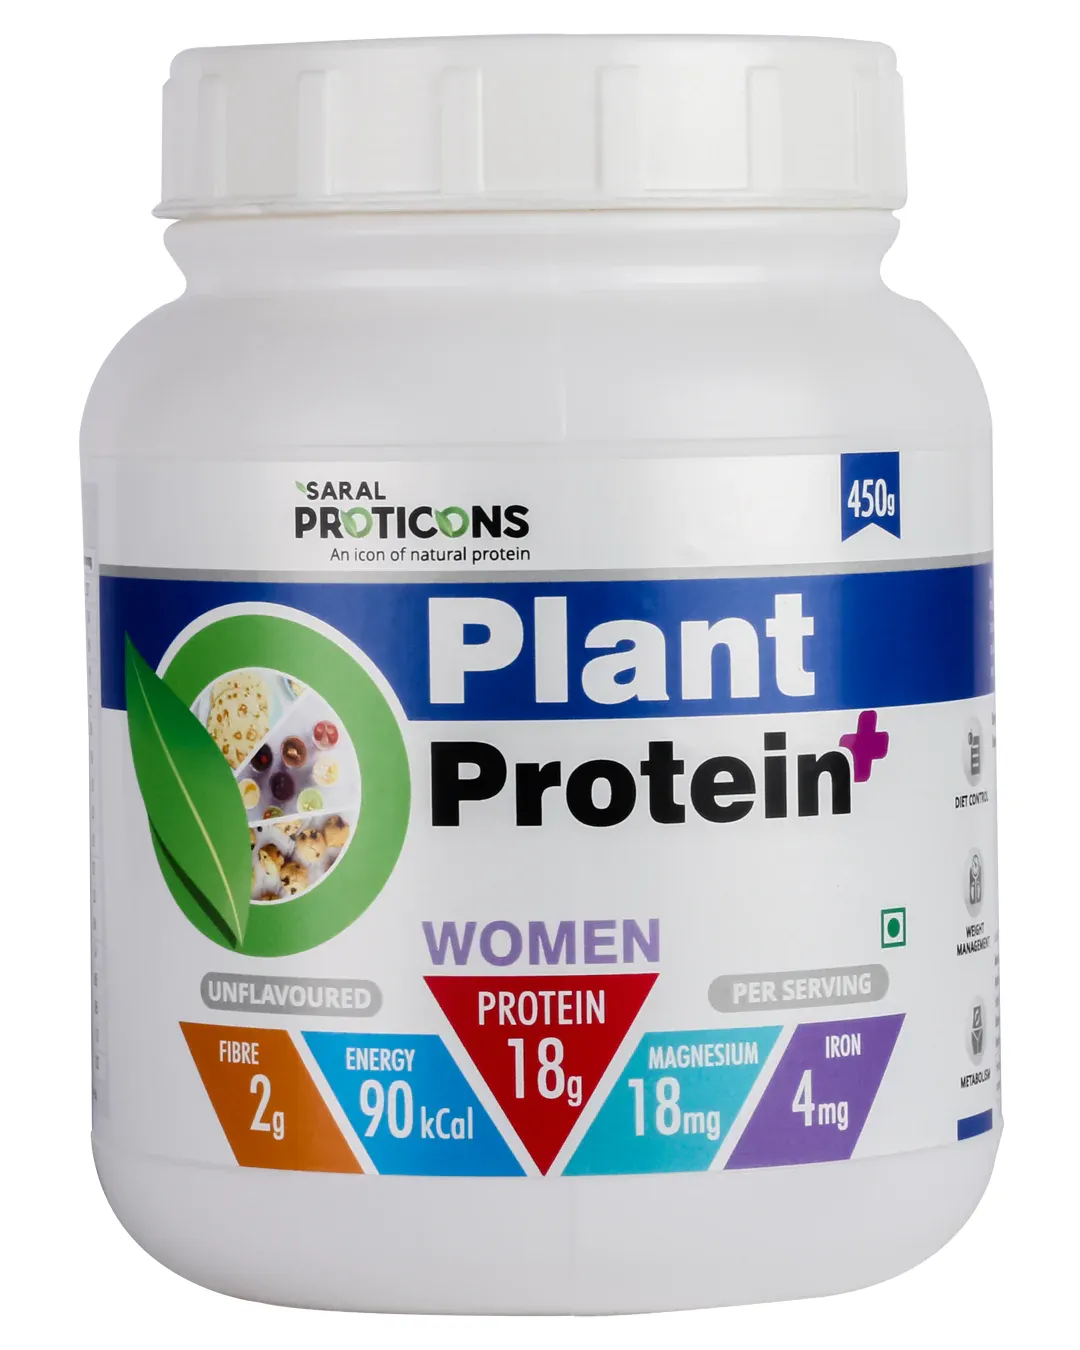 Saral Proticons Plant Protein+ for Women Image